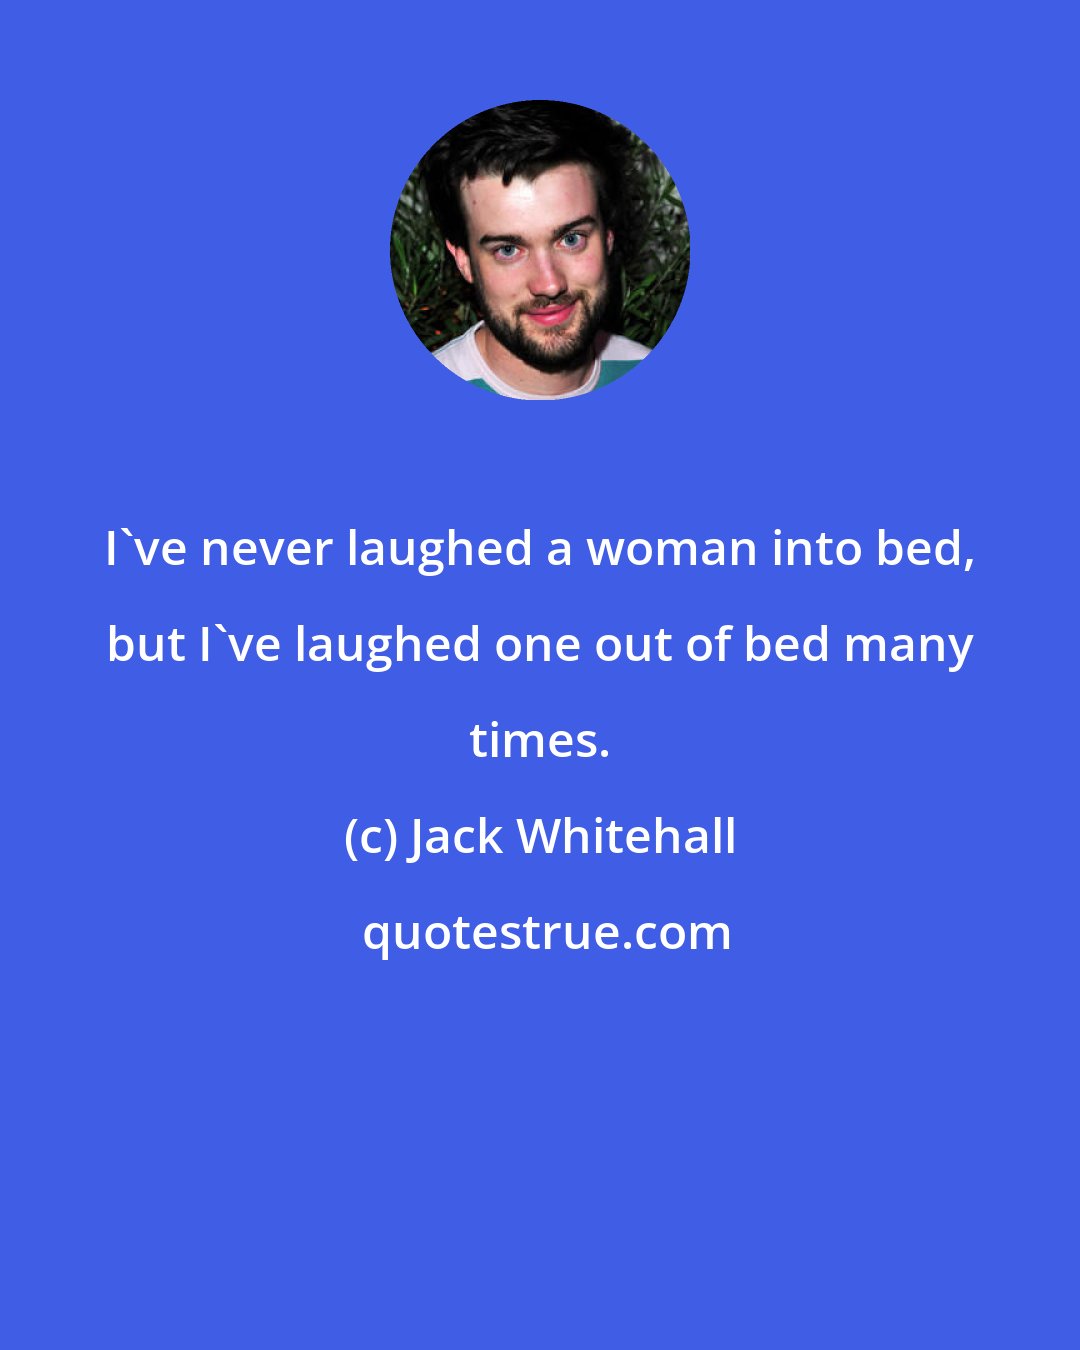 Jack Whitehall: I've never laughed a woman into bed, but I've laughed one out of bed many times.